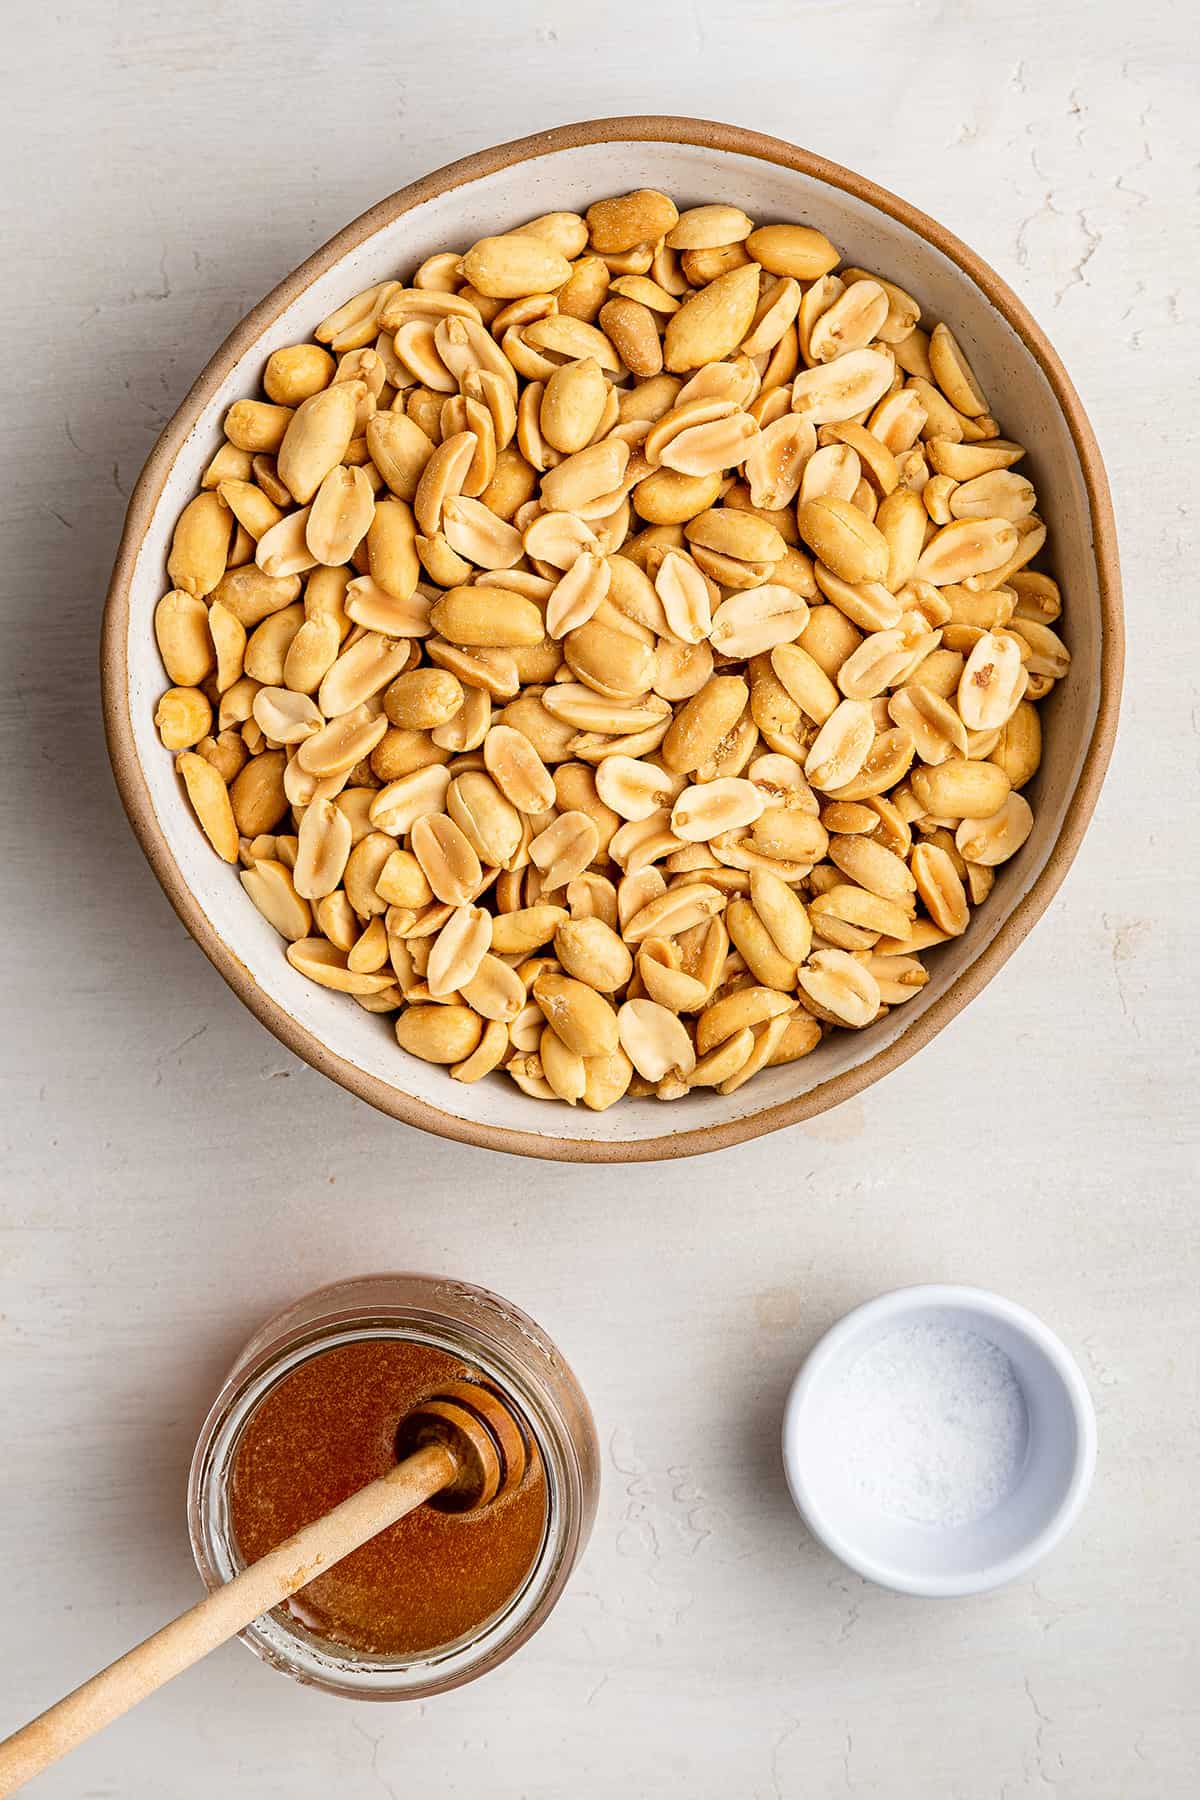 Overhead view of the ingredients needed for honey roasted peanut butter: a bowl of peanuts, a jar of honey with a wooden stirrer, and a bowl of salt